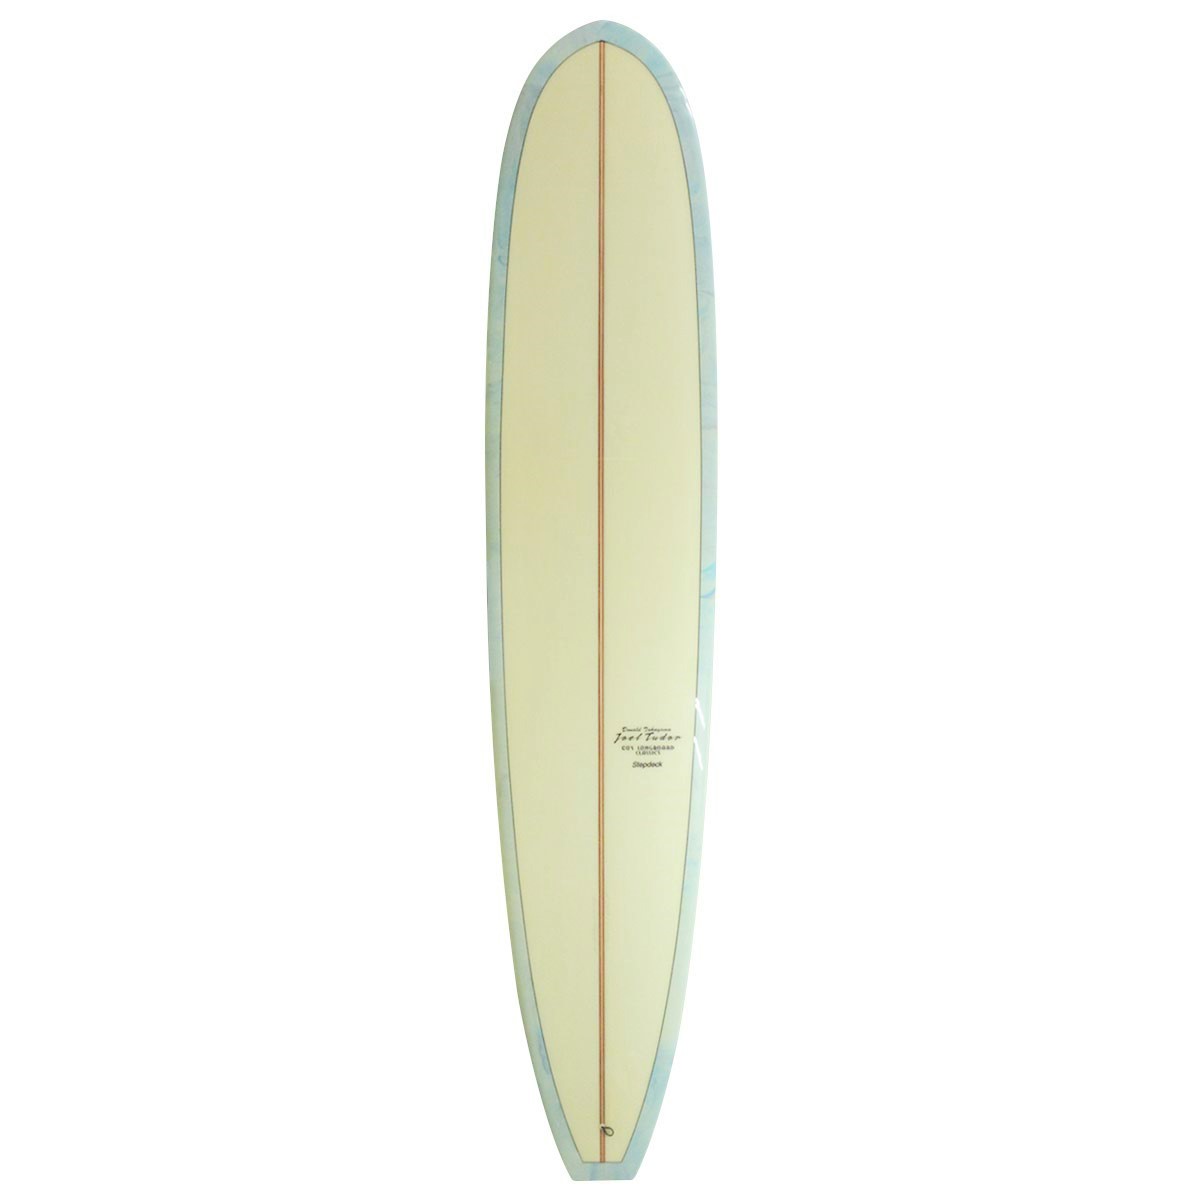 HAWAIIAN PRO DESIGNS / HAWAIIAN PRO DESIGNS / JT MODEL STEP DECK 9`2 Shaped by DT